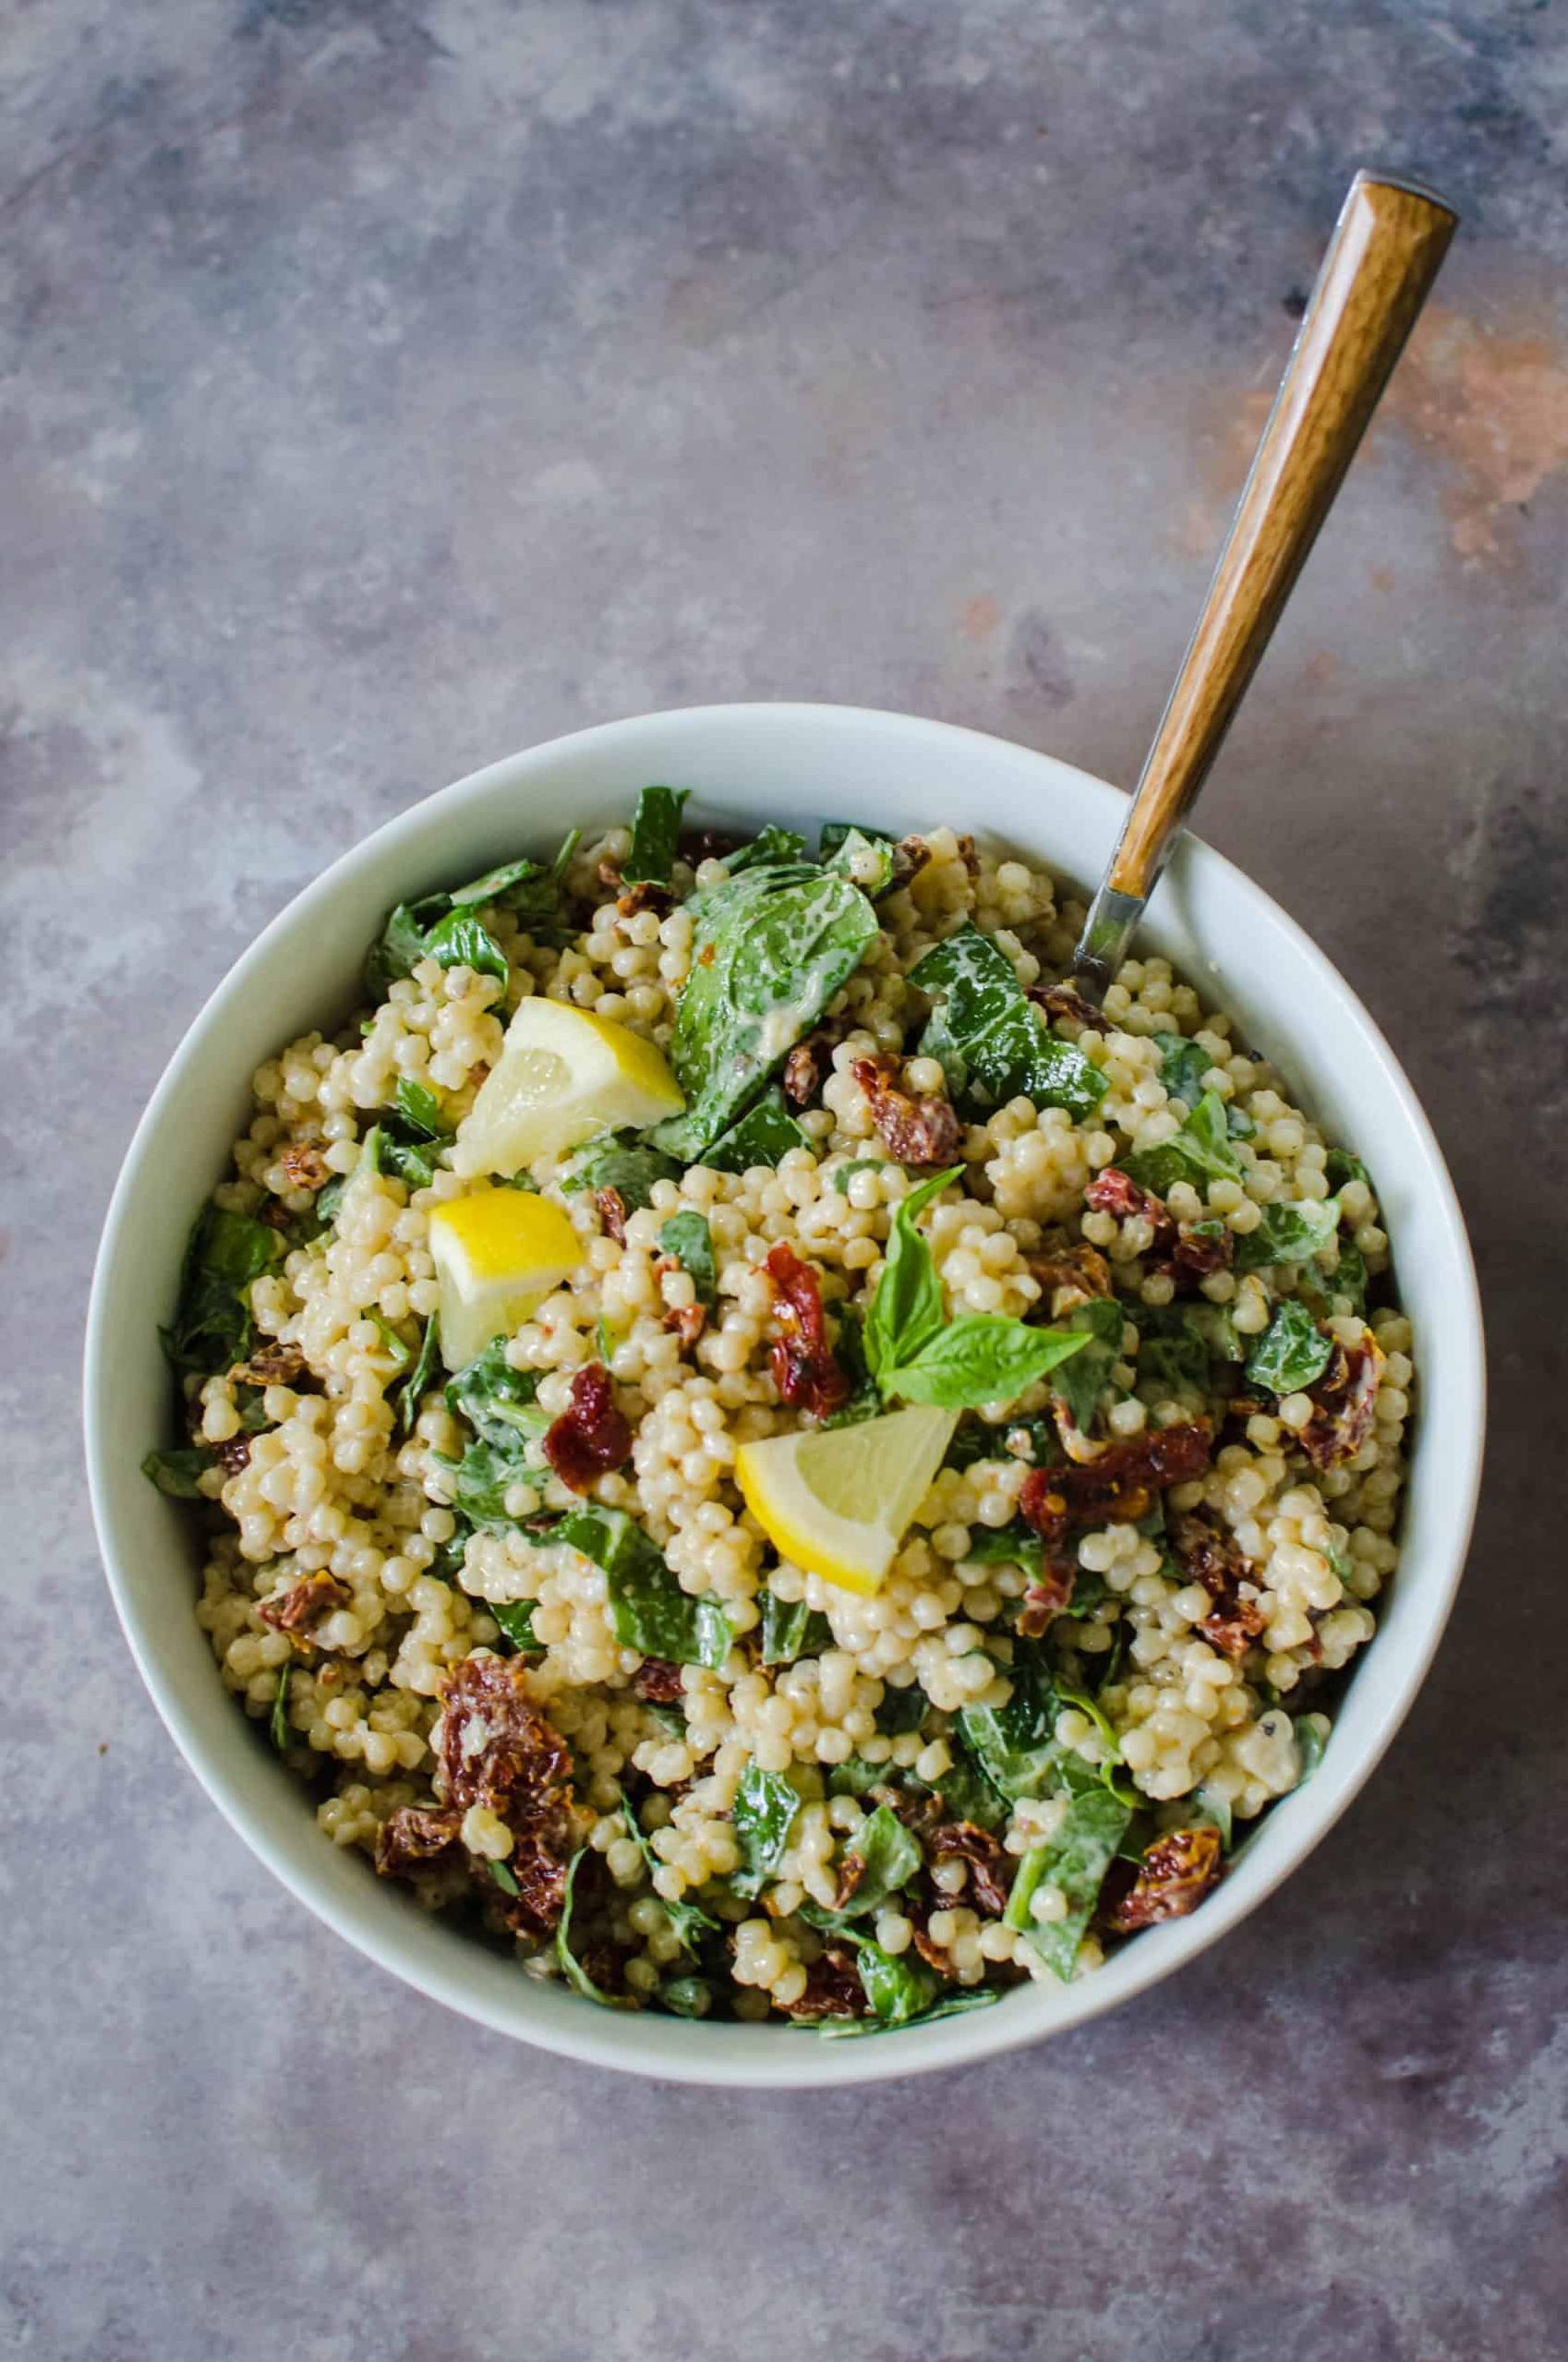  When you want something nutritious and easy, this couscous salad is the answer